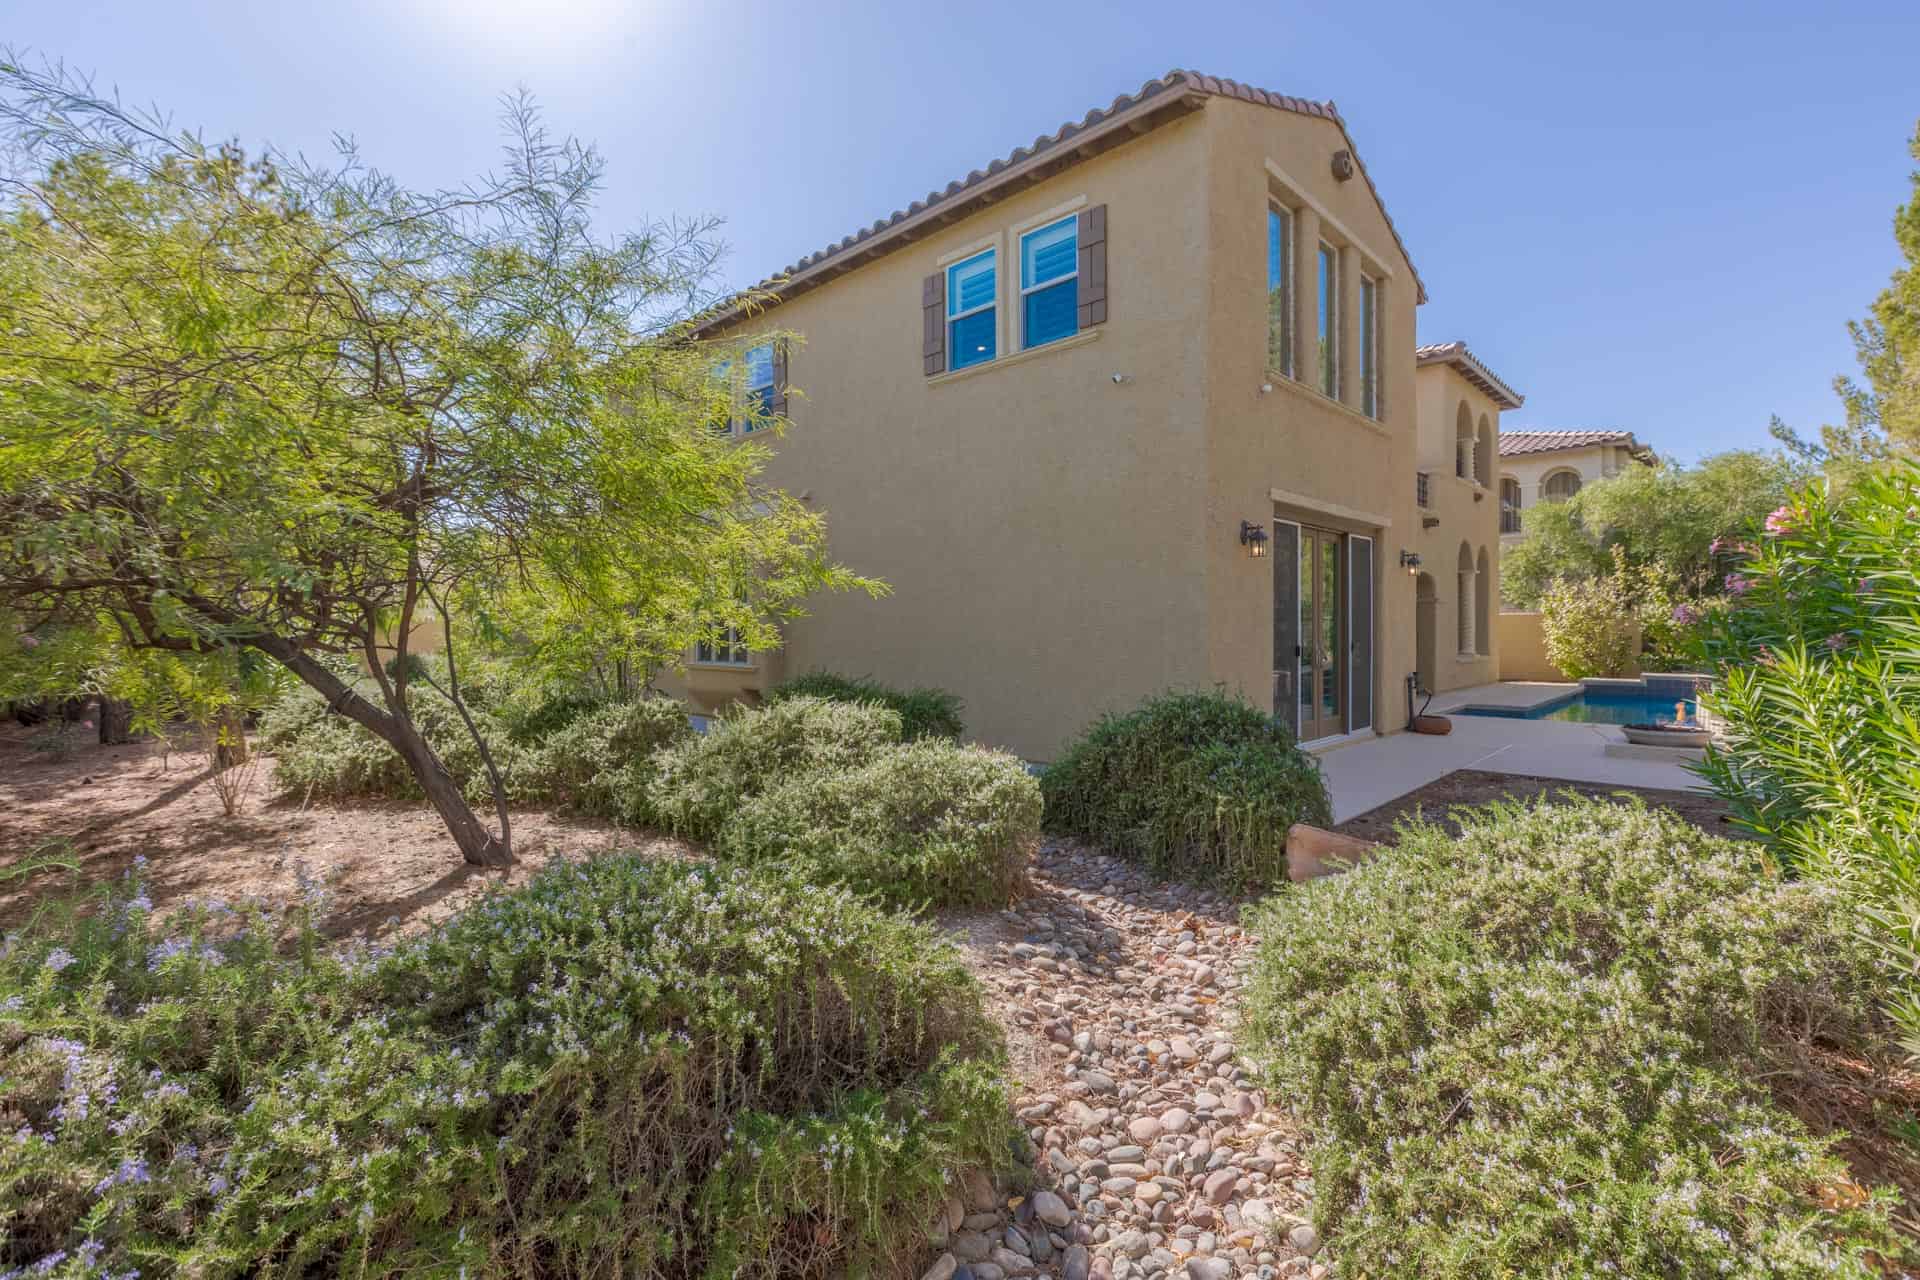 las-vegas-luxry-real-estate-realtor-rob-jensen-company-11772-canons-brooks-drive-southern-highlands45